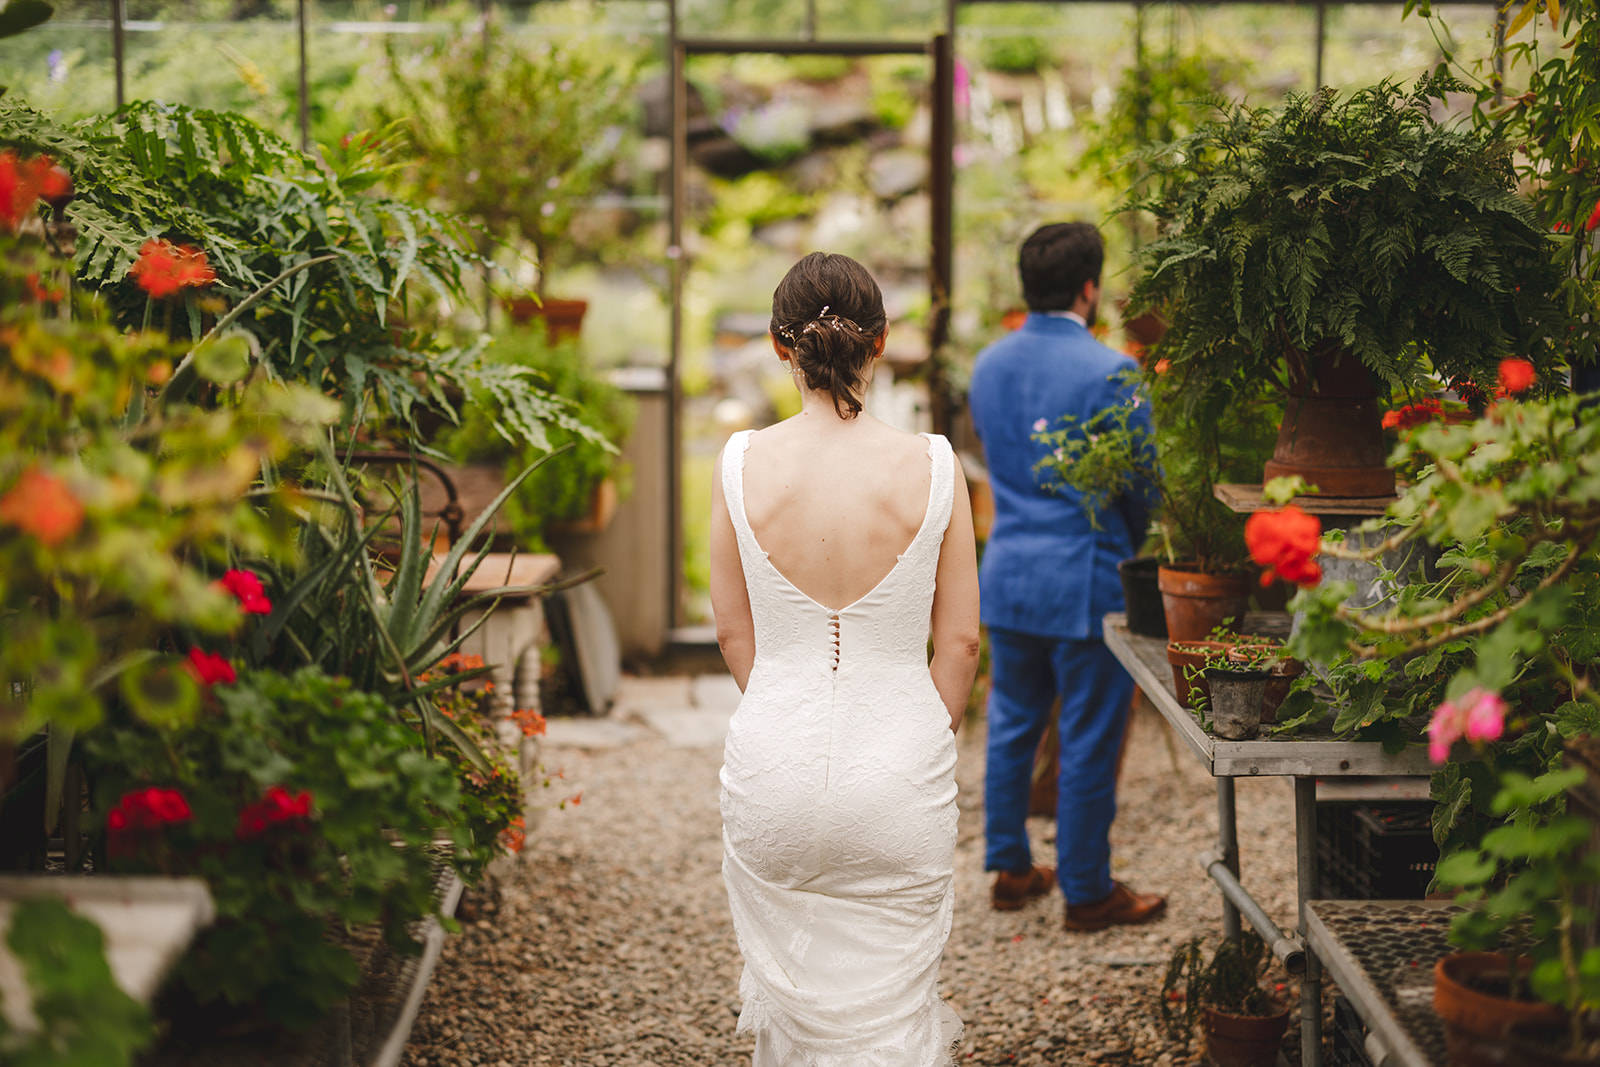 a barefoot bride wearing a white dress approaches her groom in a blue suit inside a greenhouse 